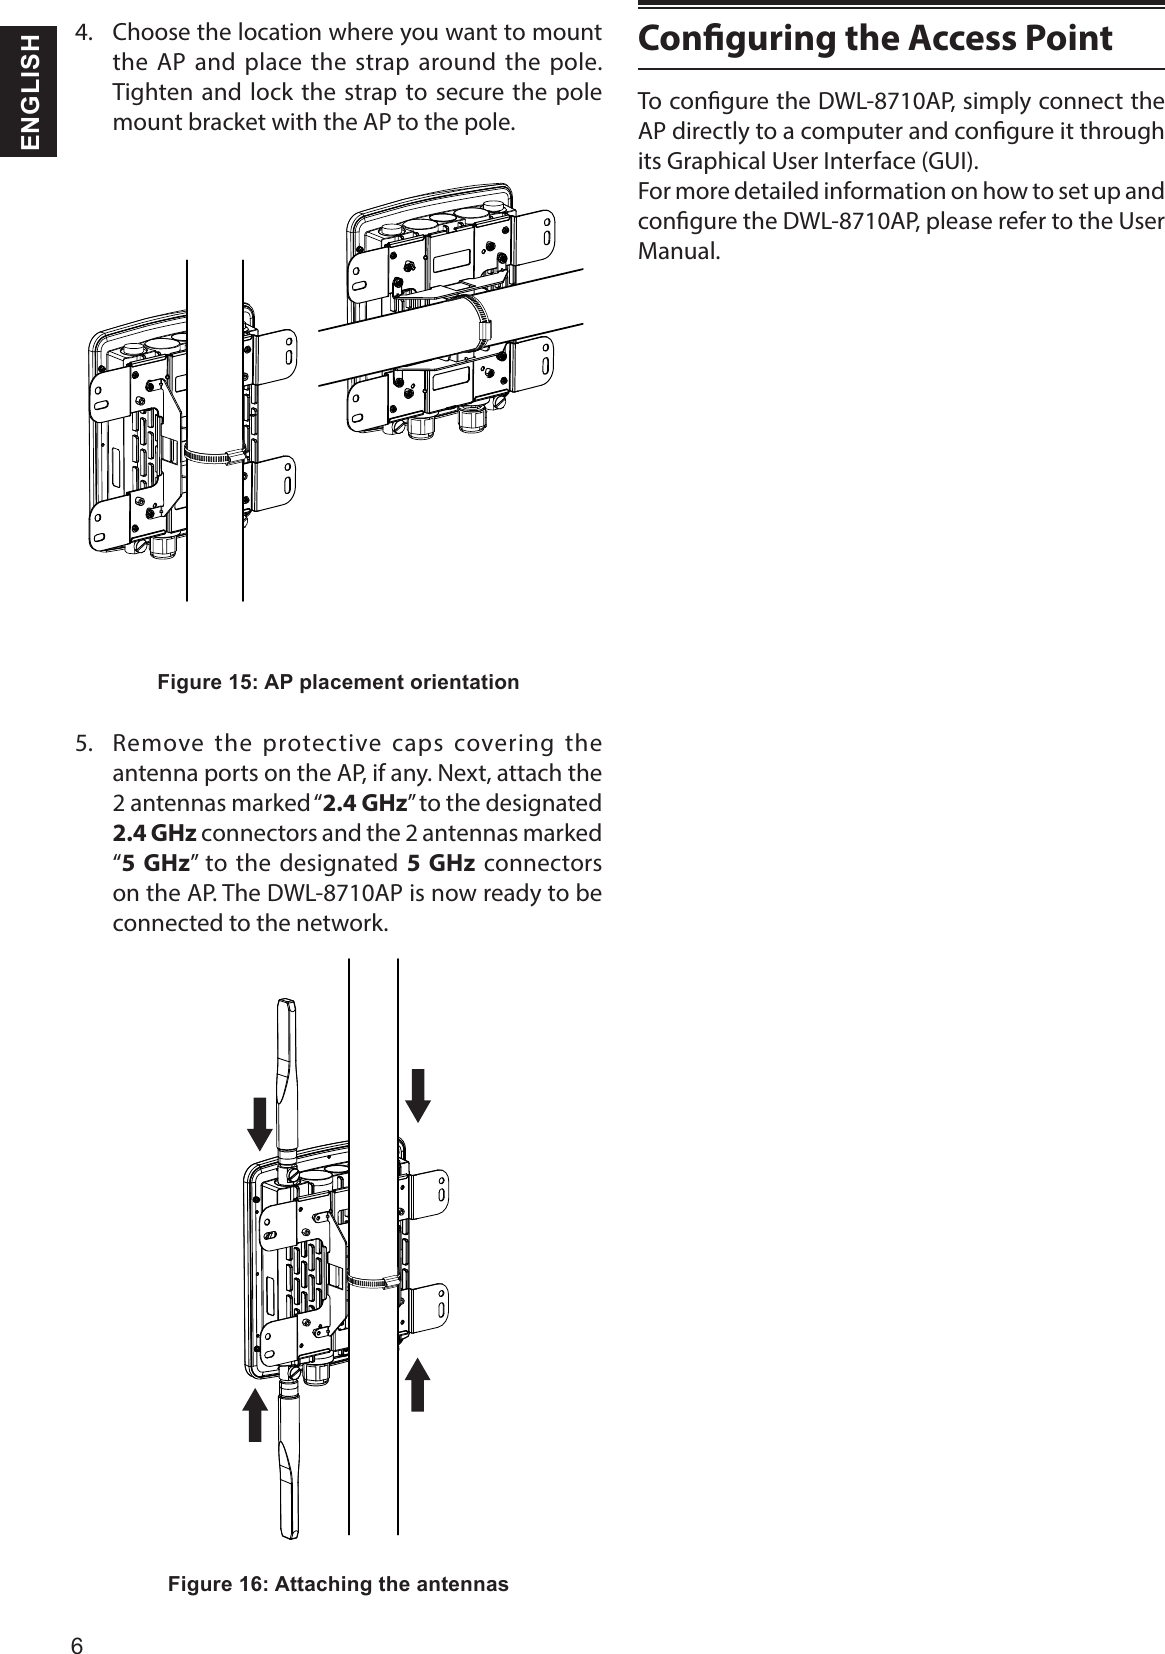 6 ENGLISH4.  Choose the location where you want to mount the AP and place the strap around the pole. Tighten and lock the strap to secure the pole mount bracket with the AP to the pole. Figure 15: AP placement orientation5.  Remove the protective caps covering the antenna ports on the AP, if any. Next, attach the 2 antennas marked “2.4 GHz” to the designated 2.4 GHz connectors and the 2 antennas marked “5 GHz” to the designated 5 GHz connectors on the AP. The DWL-8710AP is now ready to be connected to the network.Figure 16: Attaching the antennasConguring the Access PointTo congure the DWL-8710AP, simply connect the AP directly to a computer and congure it through its Graphical User Interface (GUI).For more detailed information on how to set up and congure the DWL-8710AP, please refer to the User Manual.